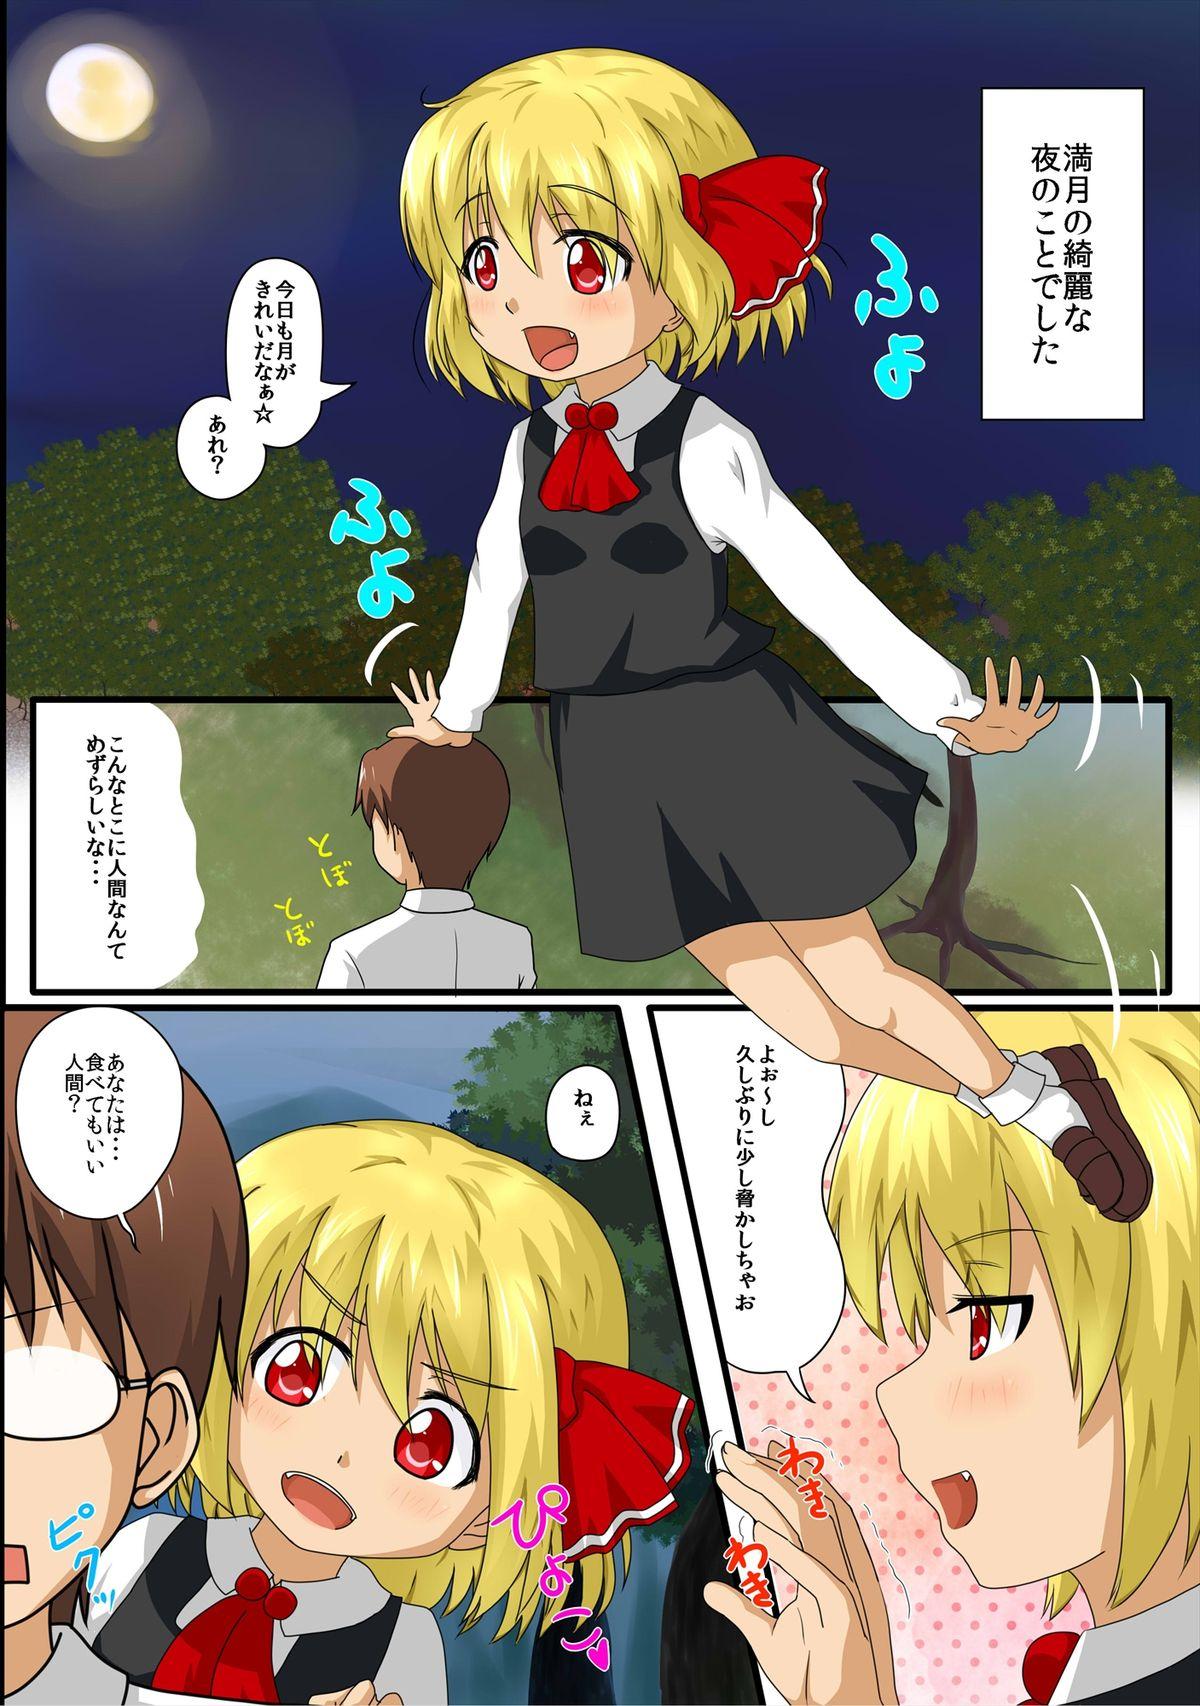 Tgirls ma cherie - Touhou project Working Boobies - Page 2